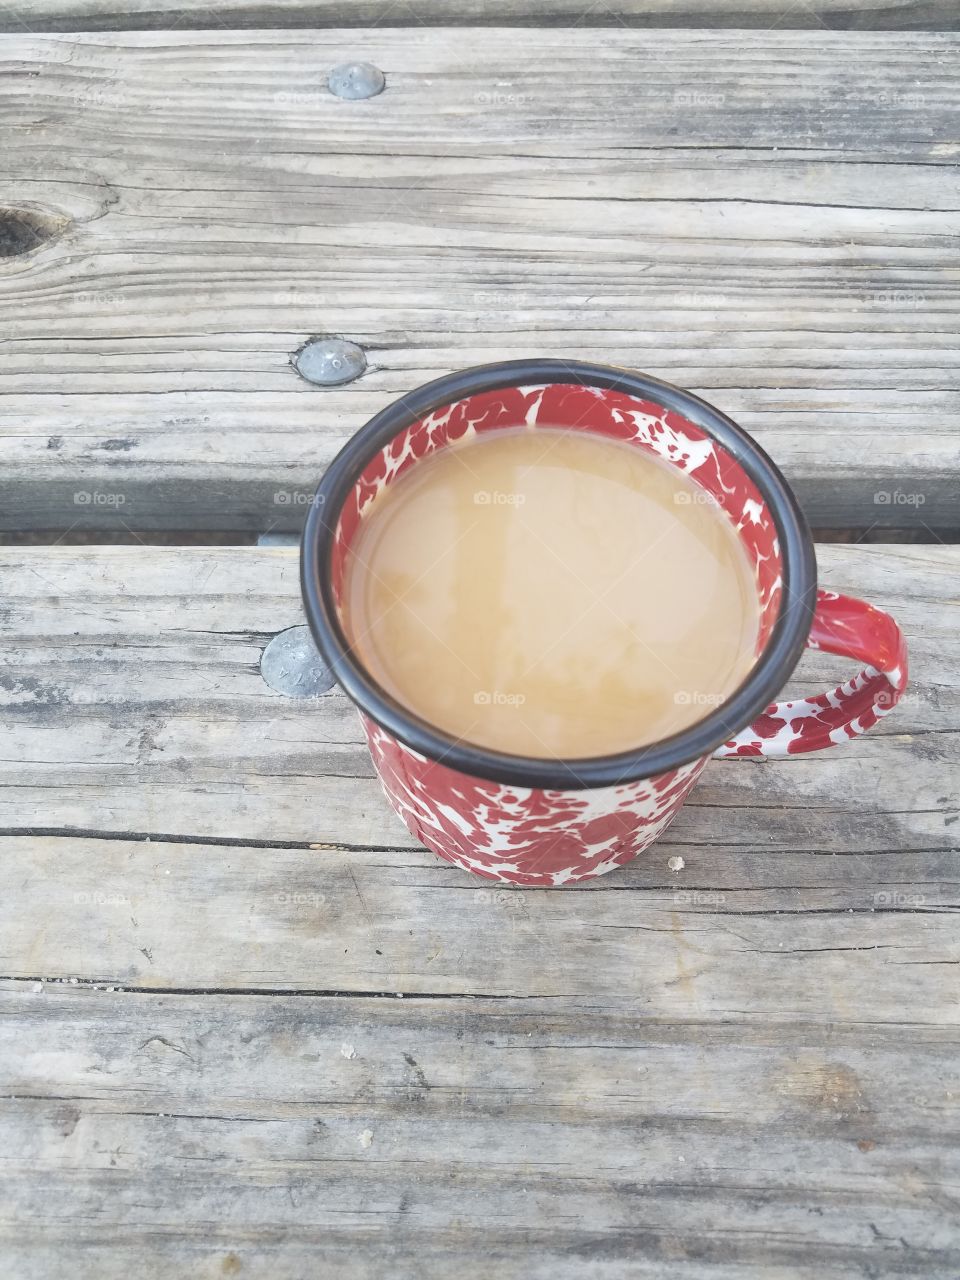 Hot coffee in a camping mug sitting on a picnic table